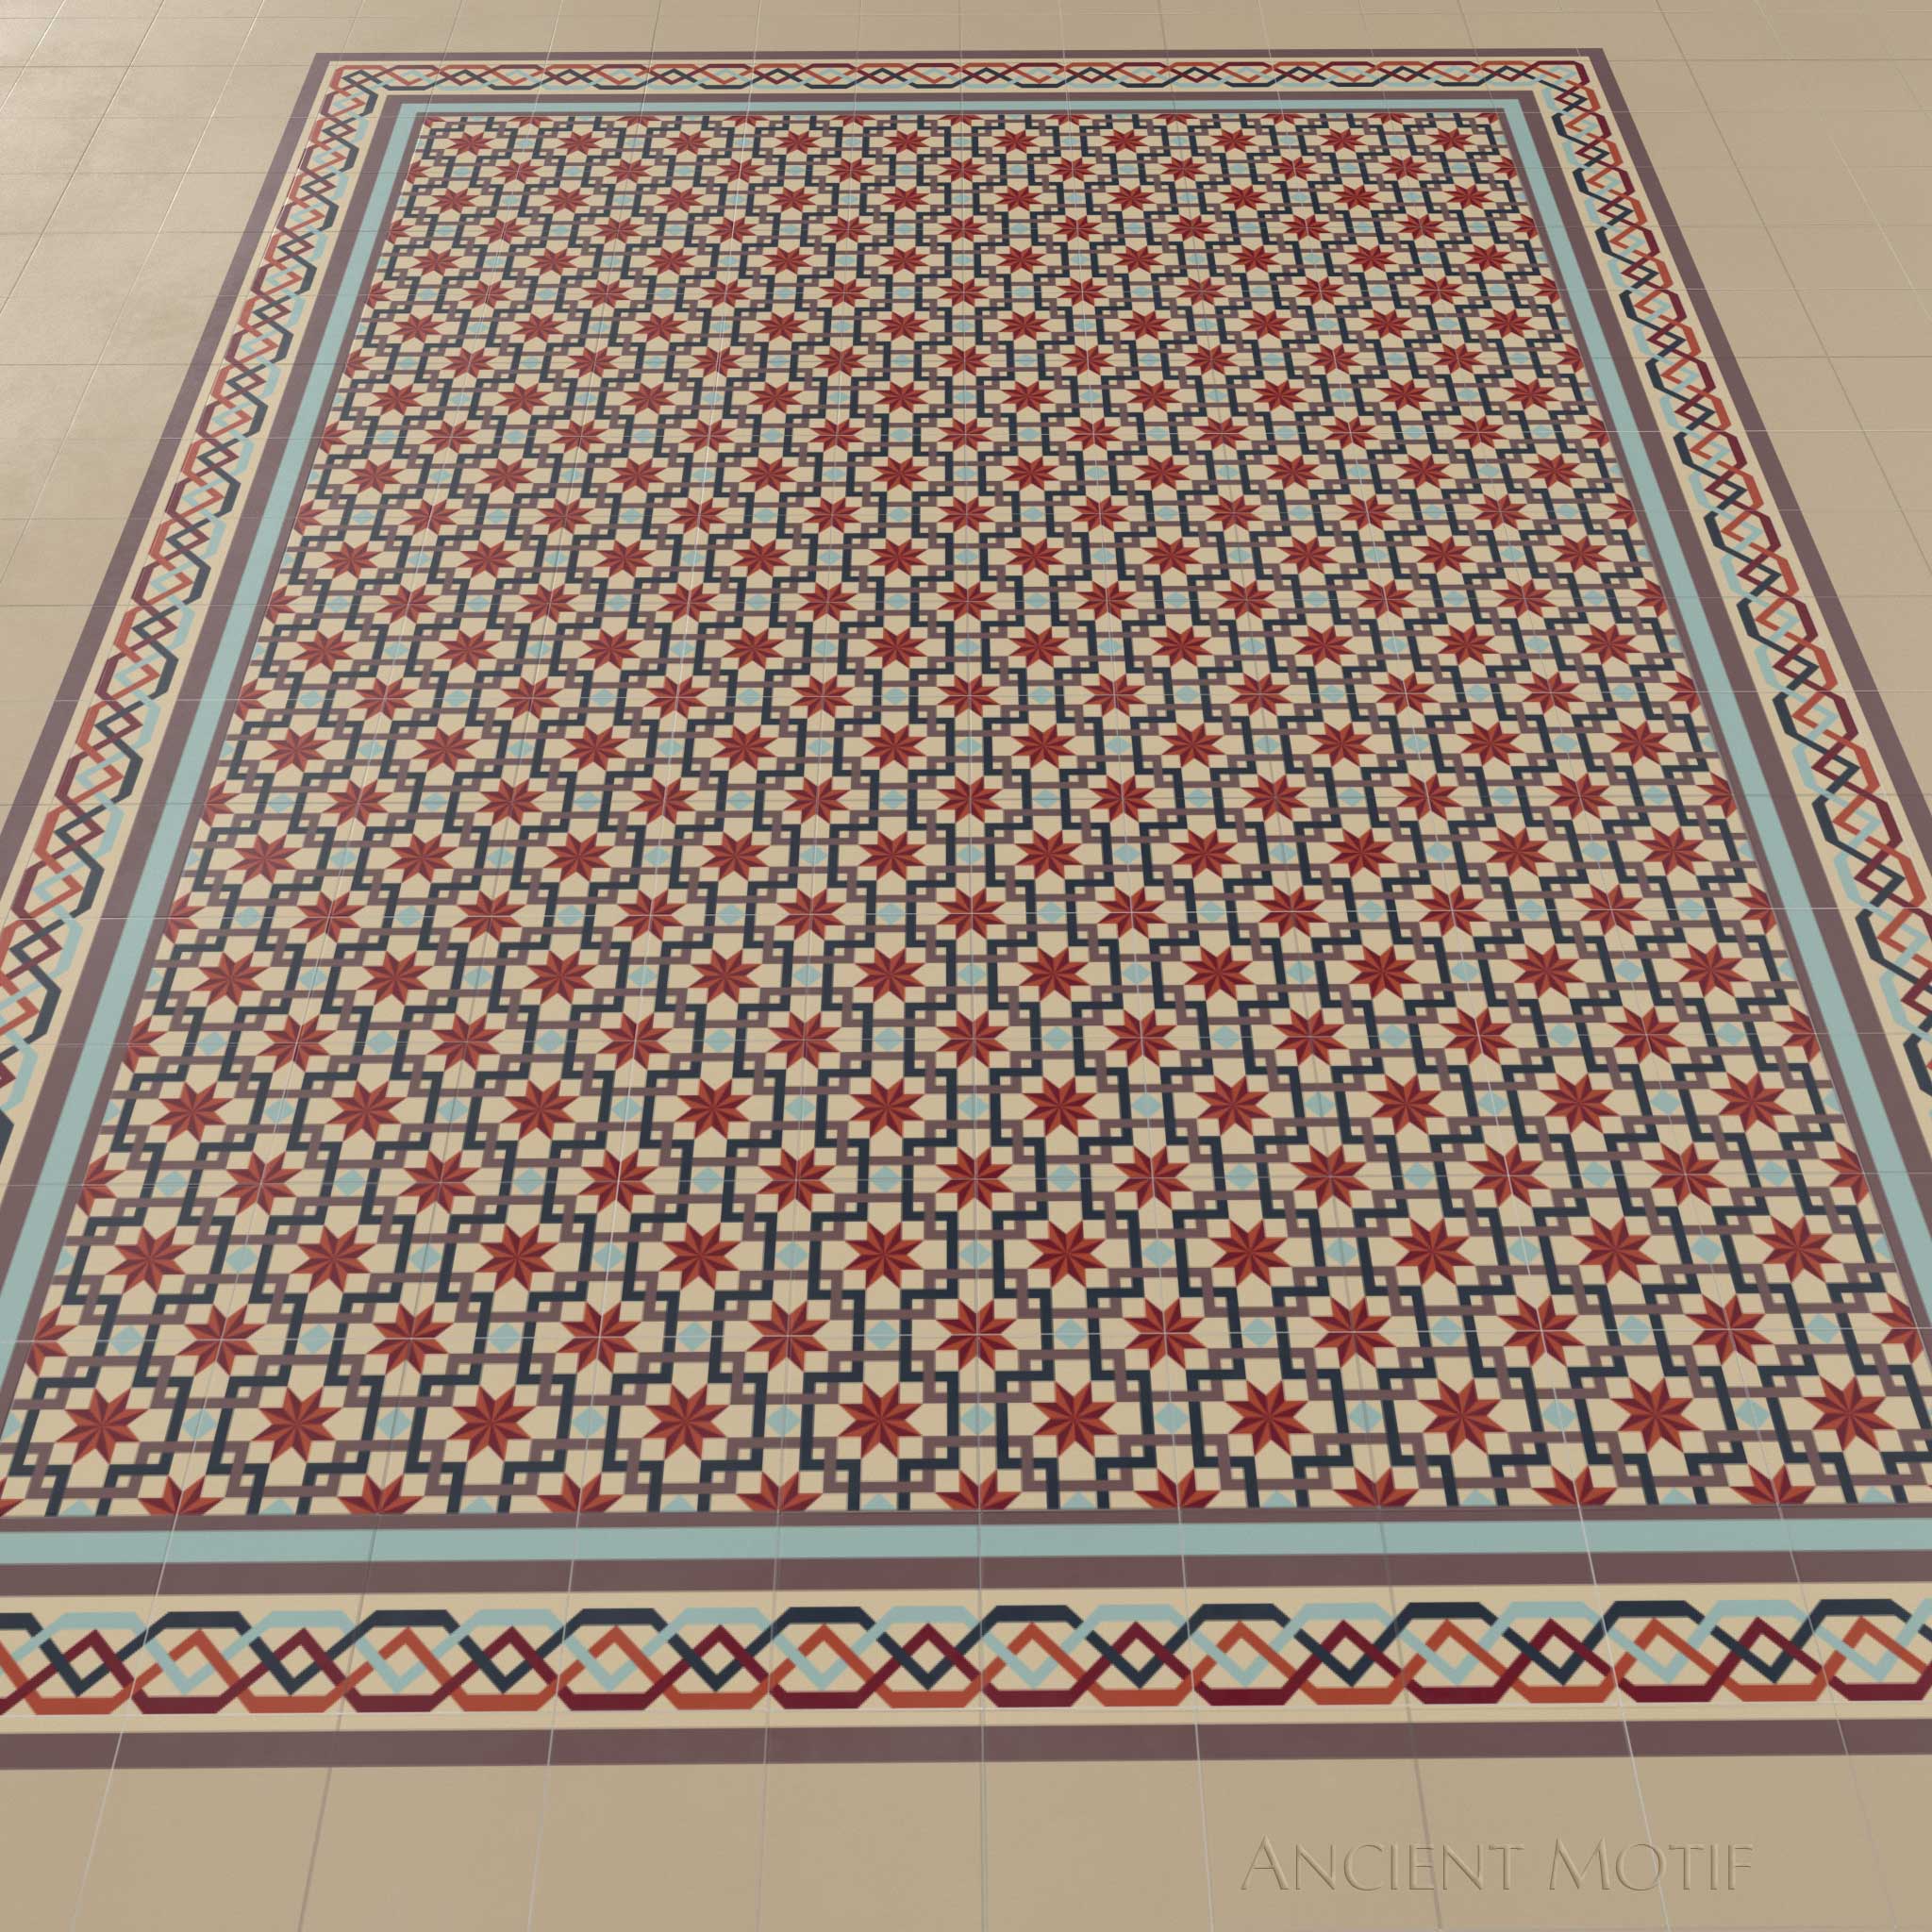 Andalusia Encaustic Cement Tile Floor in Latte, Cinamon and Peacock